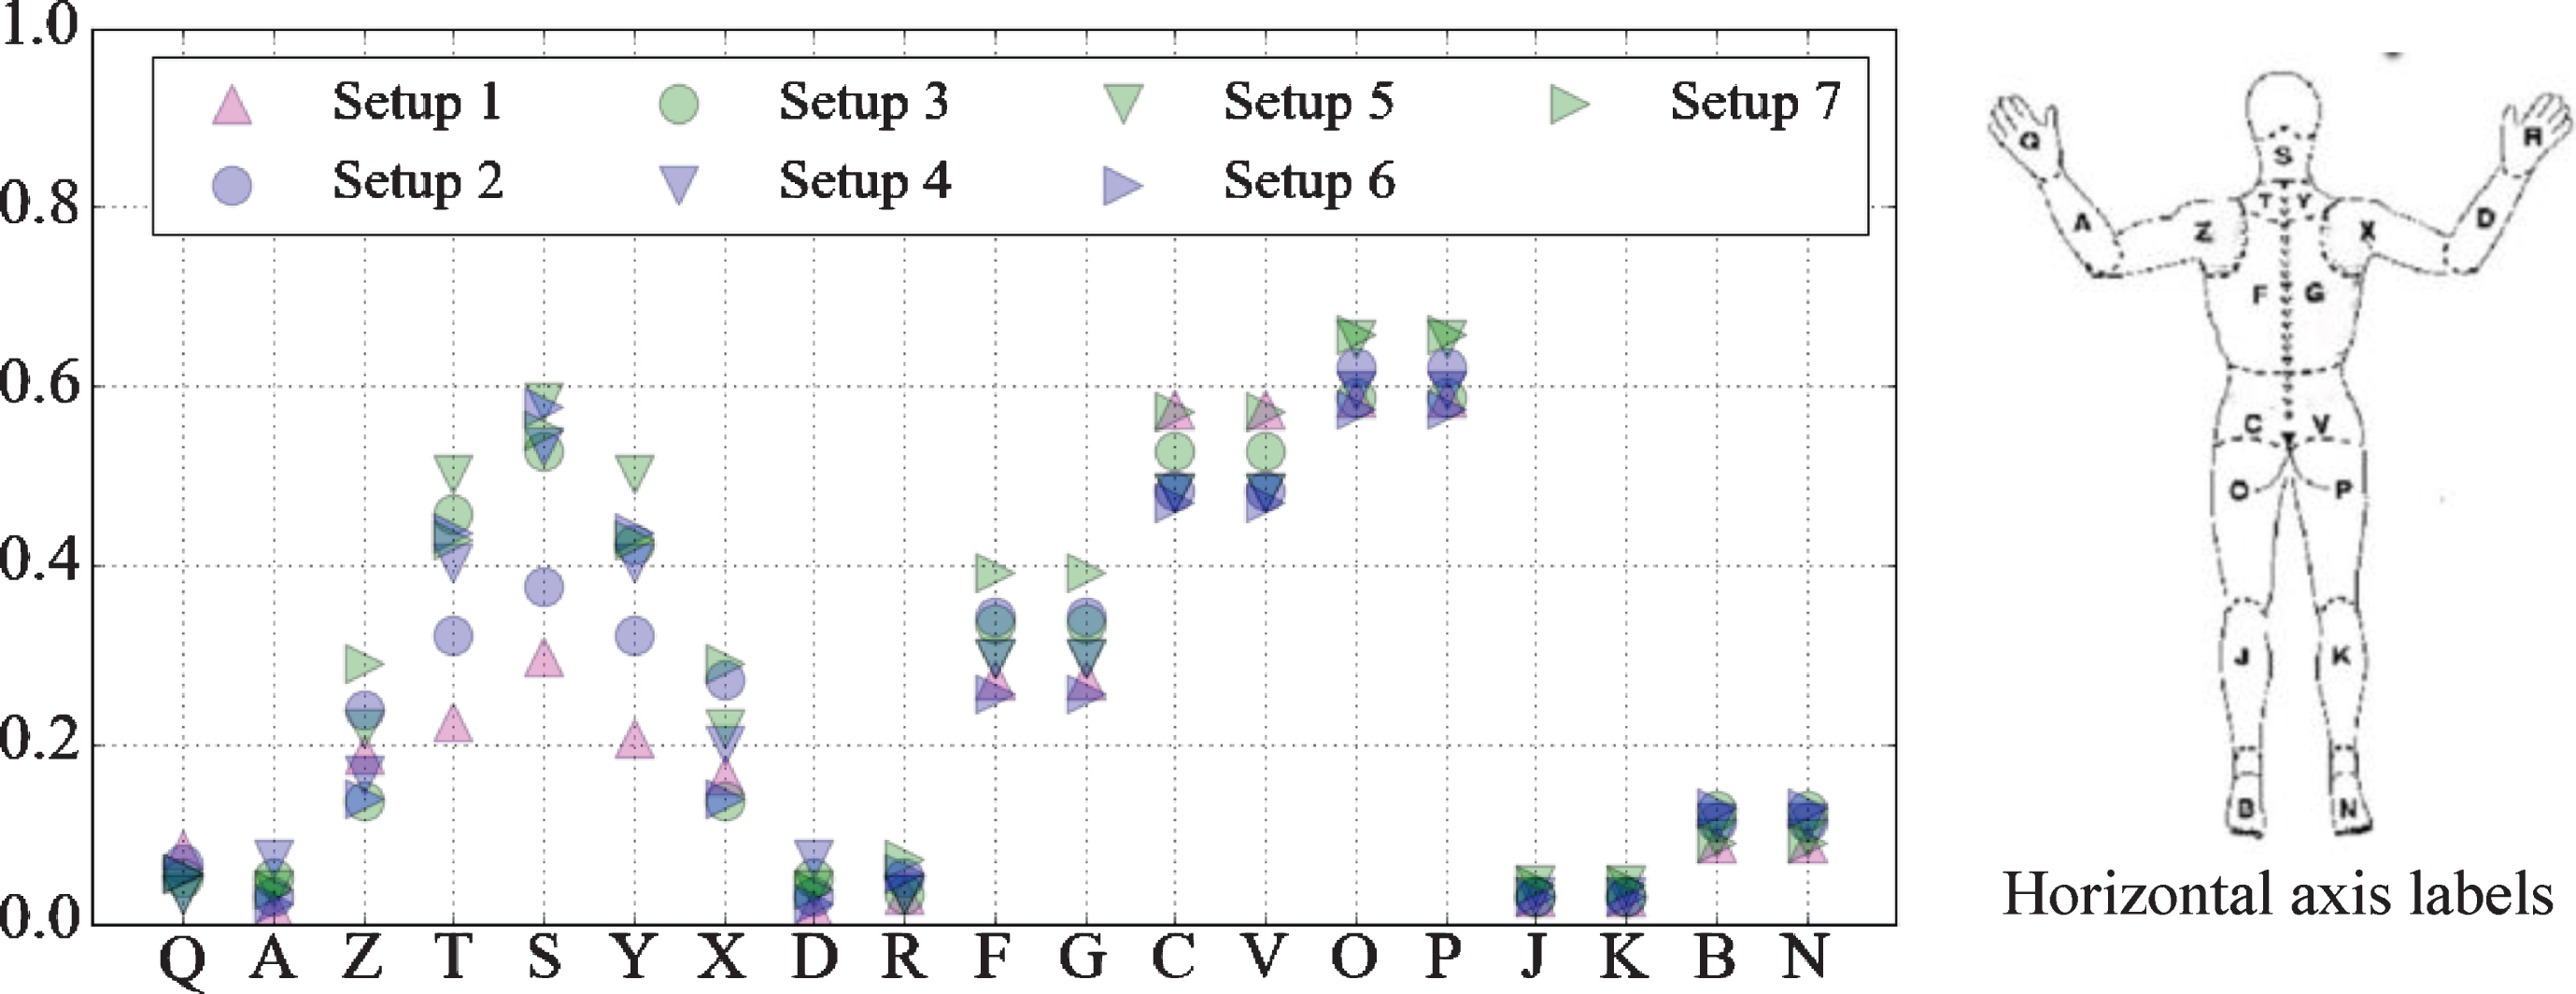 The mean normalized scores of the LPD questionnaire regarding the 7 illumination setups (right: the corresponding part of the body reagrding each letter, vertical axis: 0 = no discomfort and 1 = high discomfort).